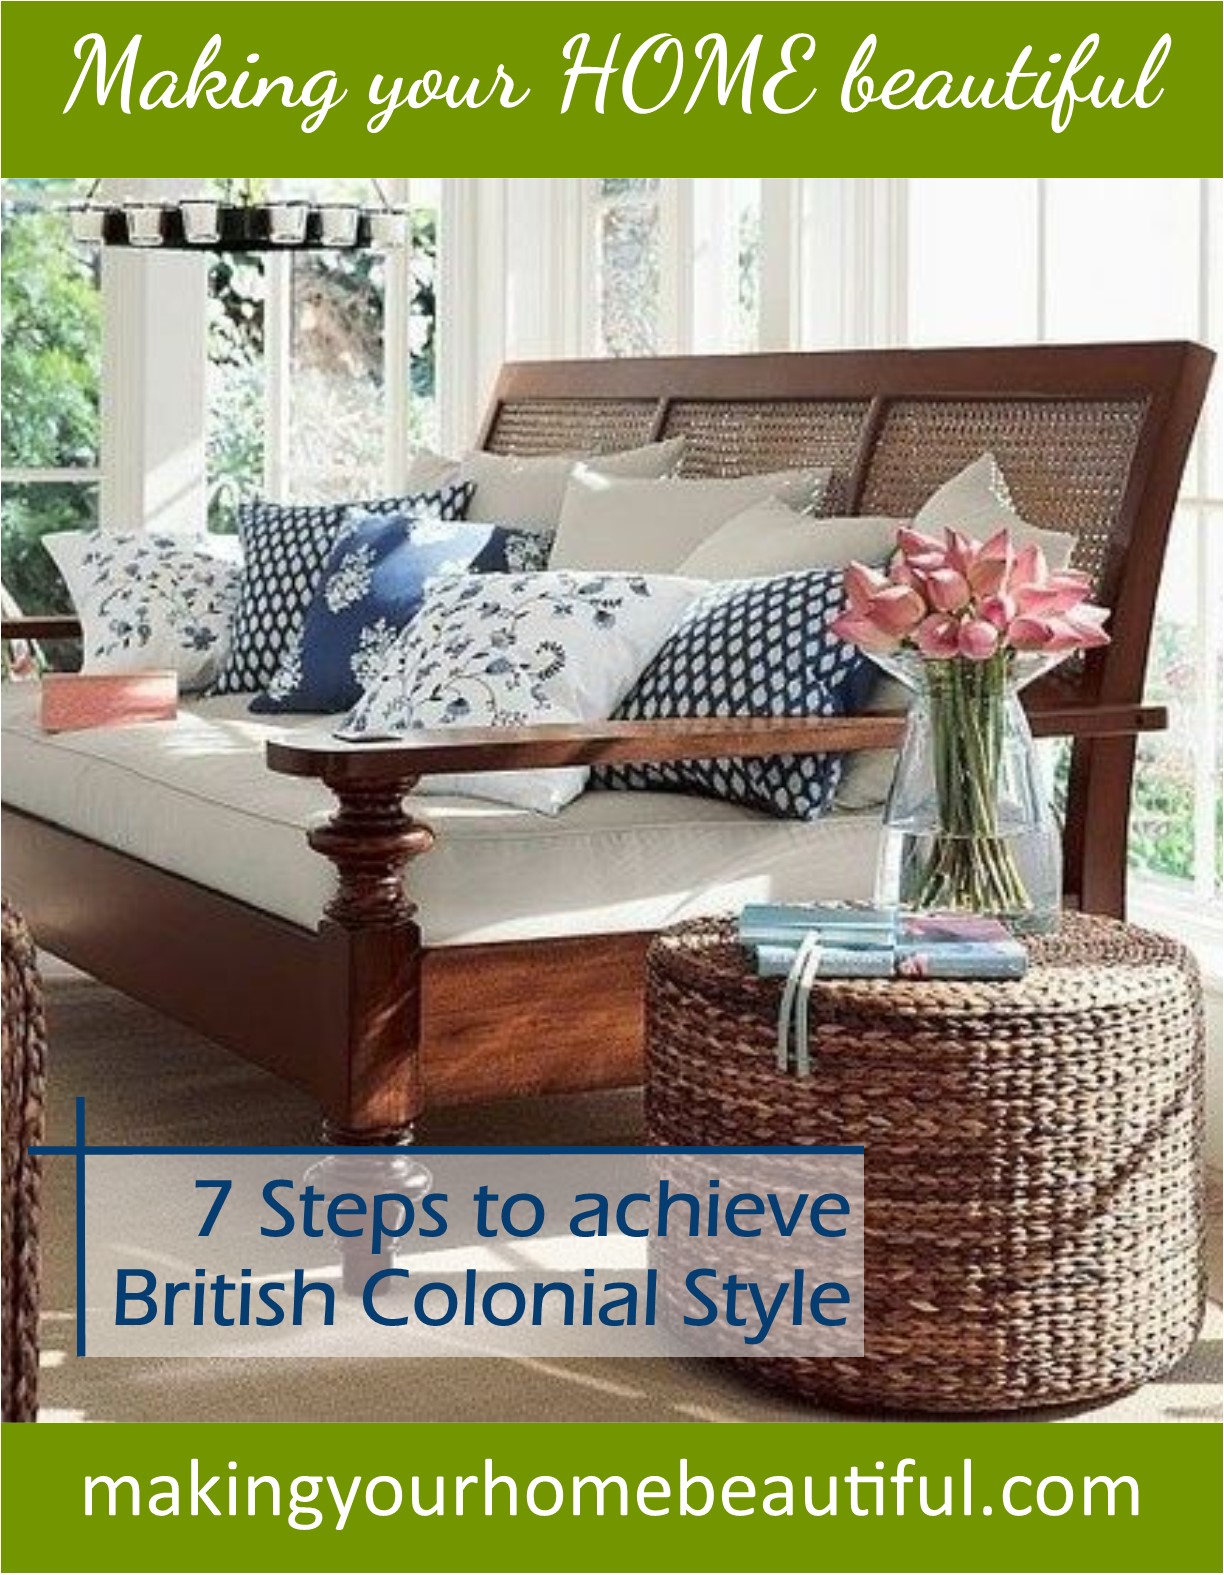 British Colonial Style - 7 steps to achieve this style